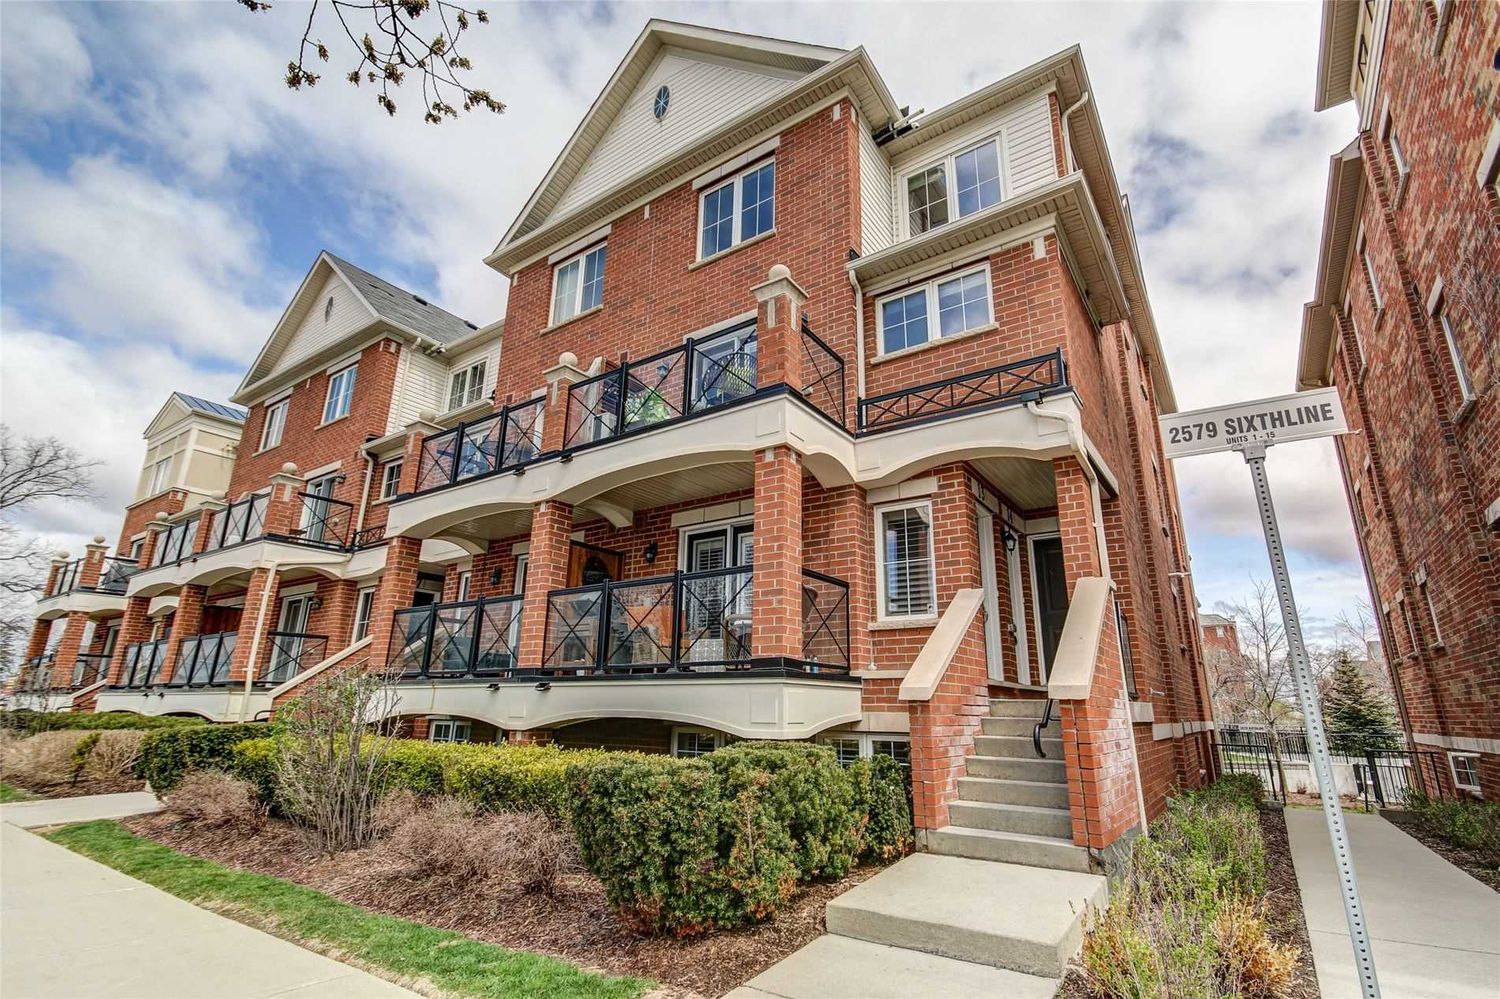 2551-2579 Sixth Line. Waterlilies Townhomes is located in  Oakville, Toronto - image #2 of 2